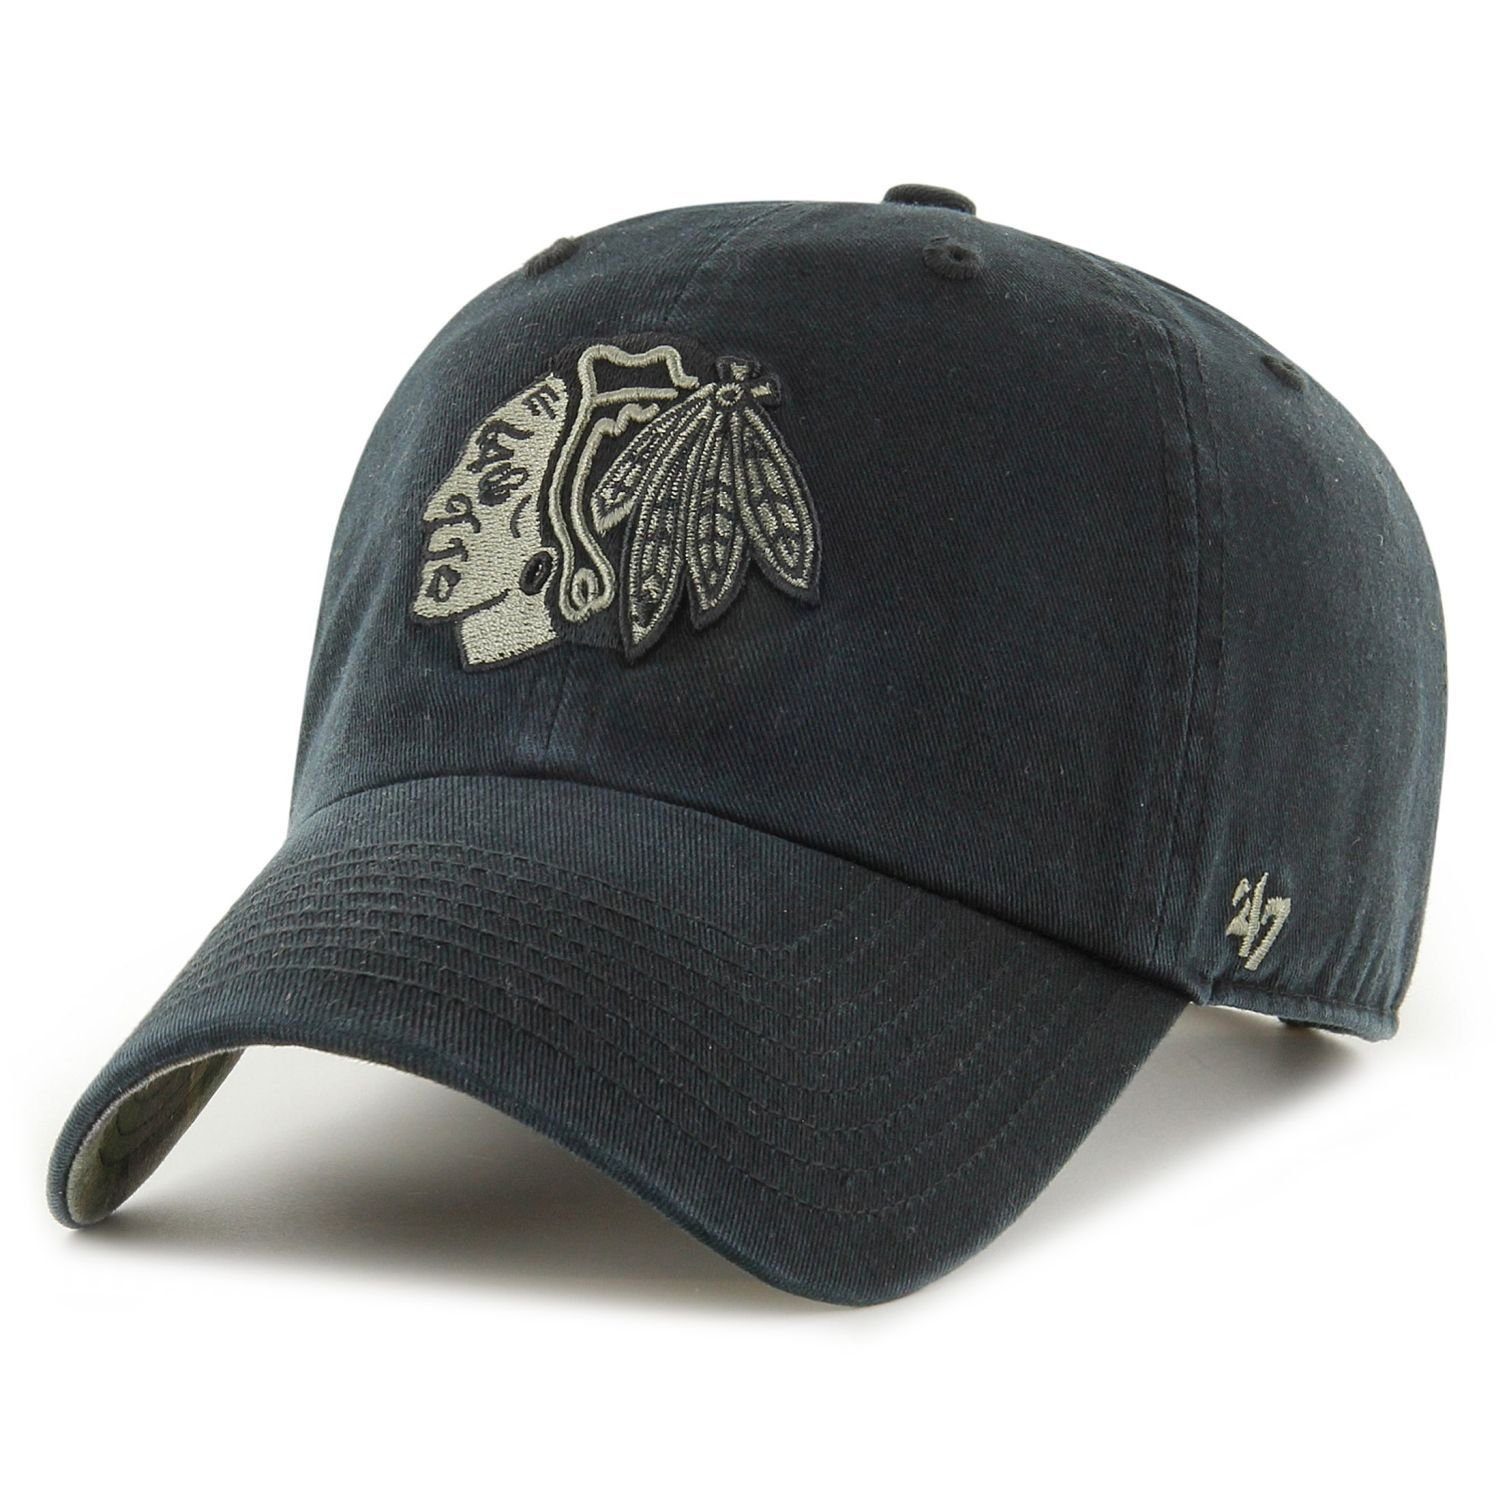 '47 Brand Trucker Cap Relaxed Fit CLEAN UP Chicago Blackhawks